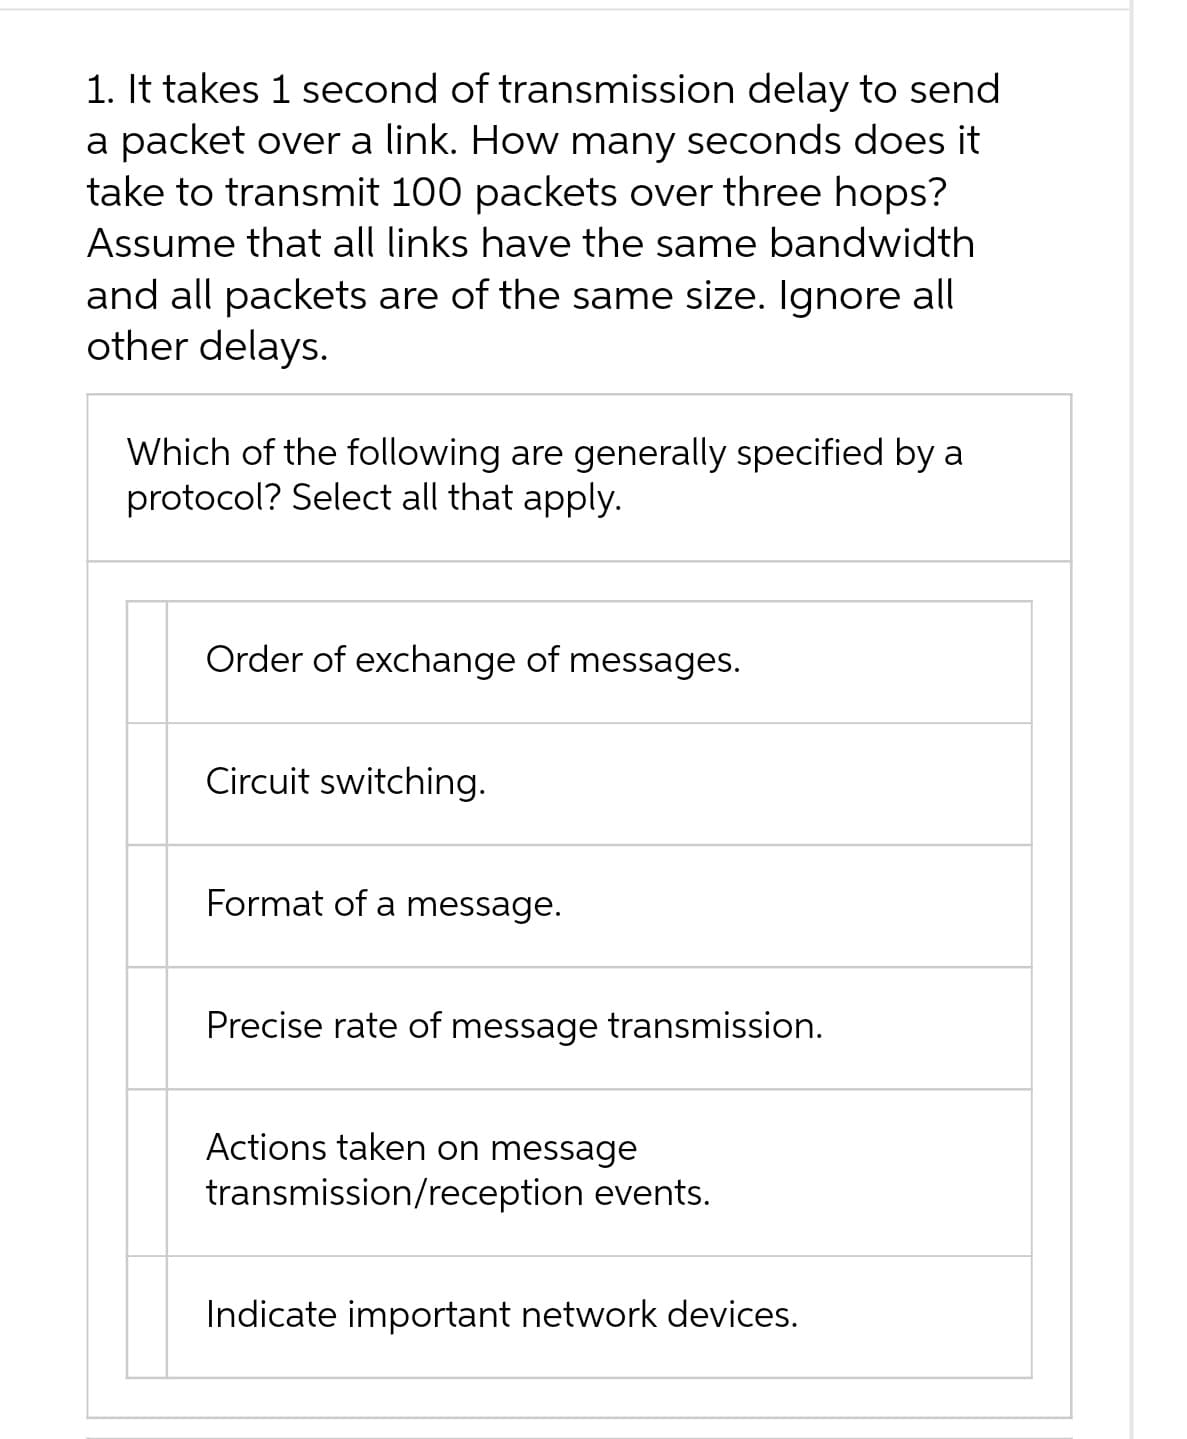 1. It takes 1 second of transmission delay to send
a packet over a link. How many seconds does it
take to transmit 100 packets over three hops?
Assume that all links have the same bandwidth
and all packets are of the same size. Ignore all
other delays.
Which of the following are generally specified by a
protocol? Select all that apply.
Order of exchange of messages.
Circuit switching.
Format of a message.
Precise rate of message transmission.
Actions taken on message
transmission/reception events.
Indicate important network devices.